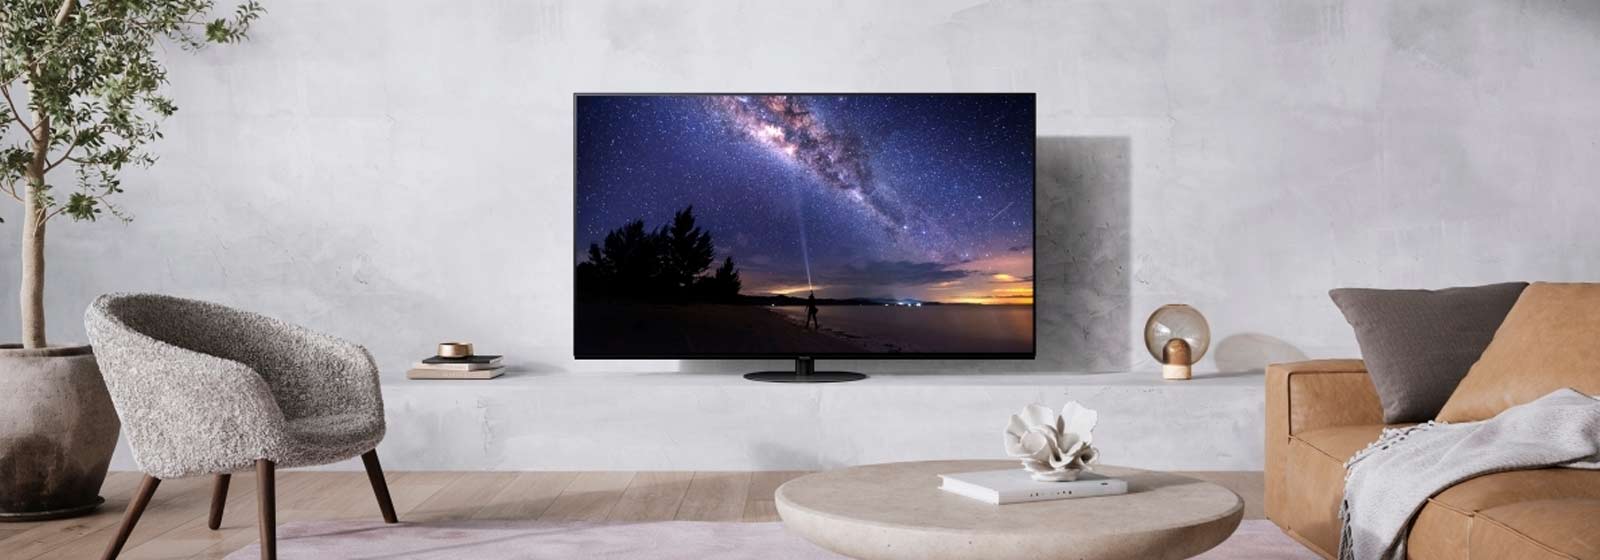 Televisions for gaming